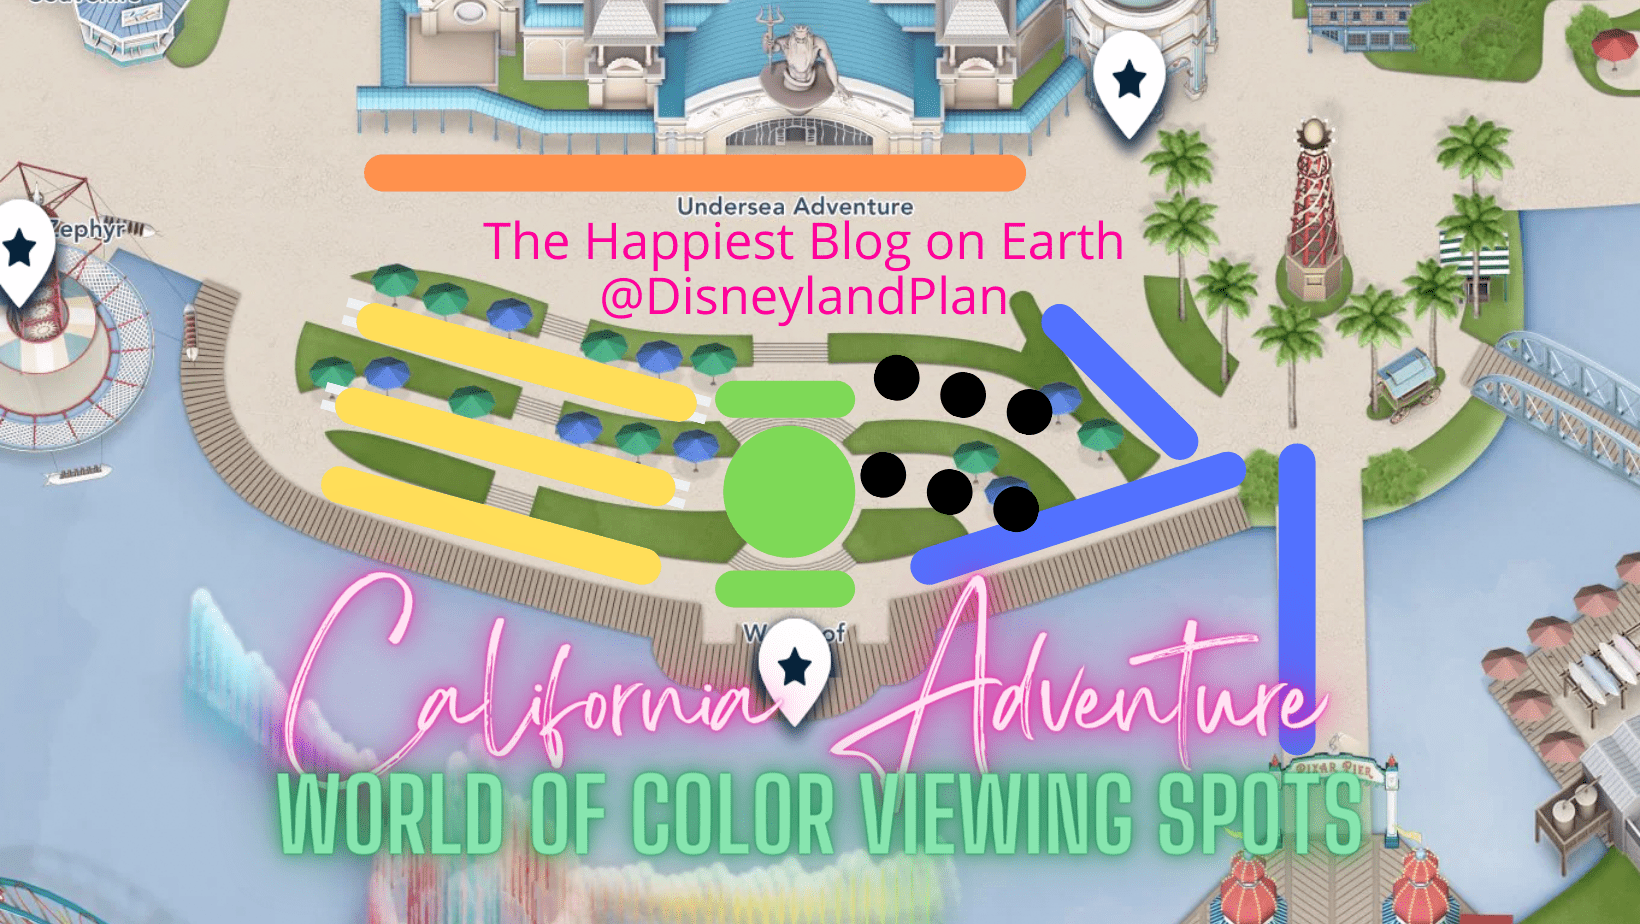 World of Color Front and Center Where to Watch this Disney Show